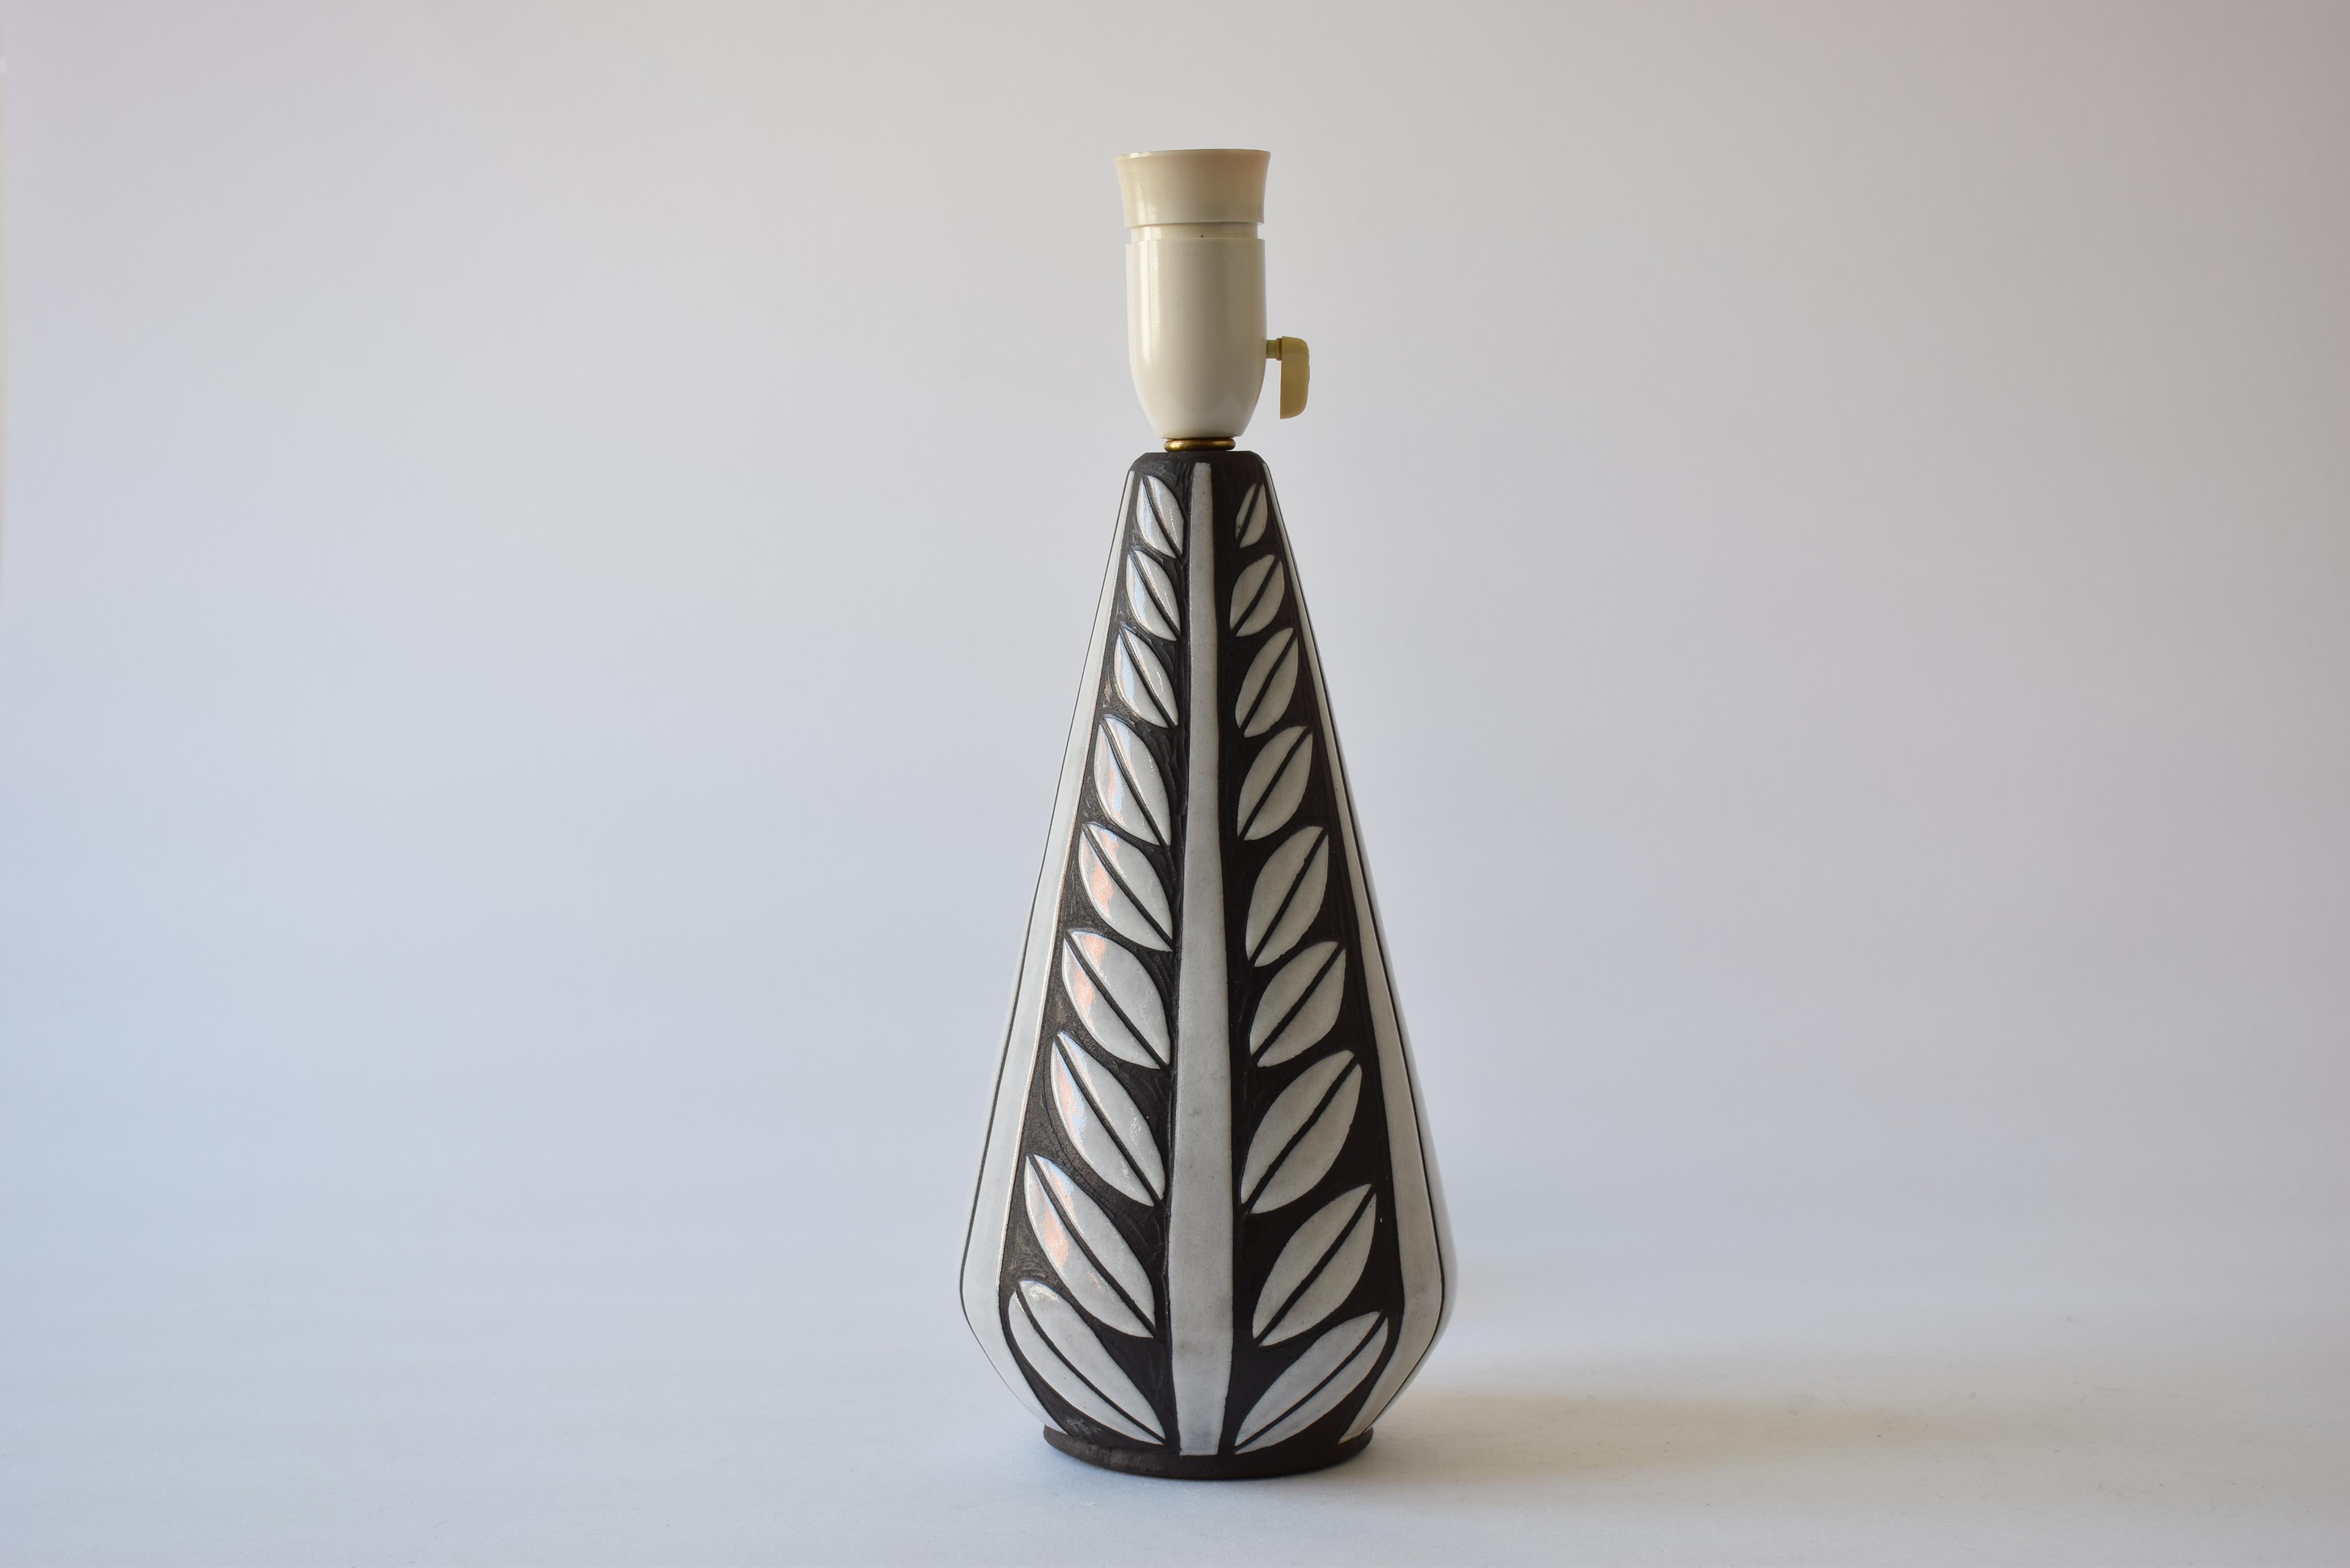 Marianne Starck for MA&S Ceramic Table Lamp Sgraffito Negro Tribal Danish, 1960s In Good Condition For Sale In Aarhus C, DK